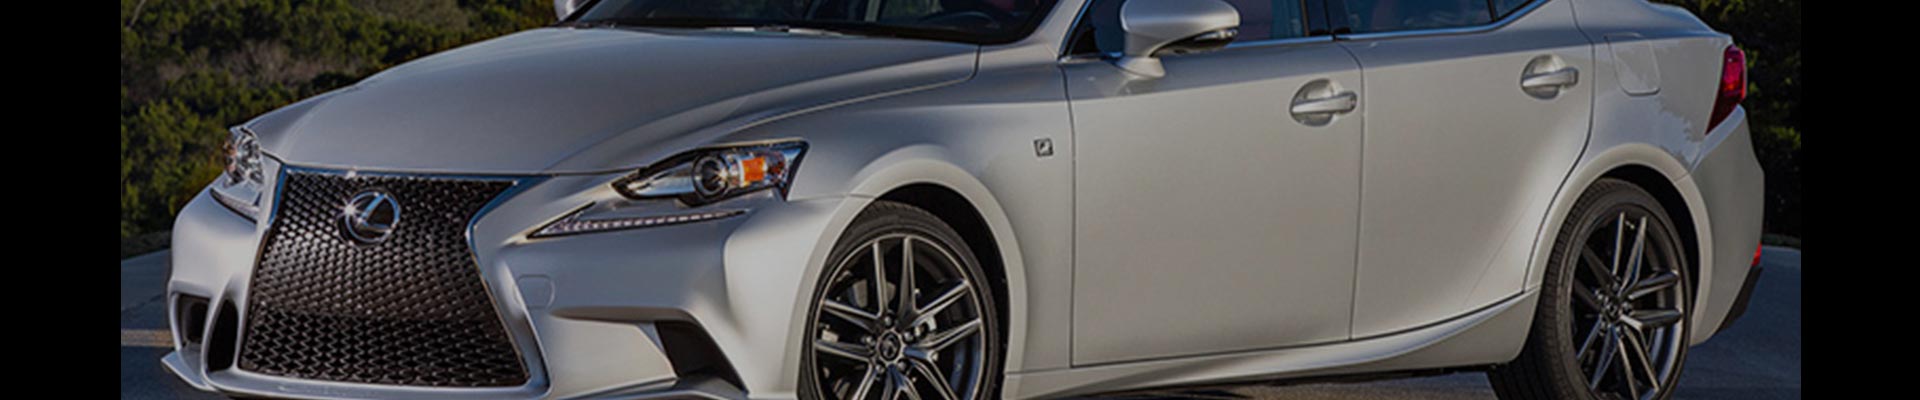 Shop Replacement and OEM 2011 Lexus IS350 Parts with Discounted Price on the Net